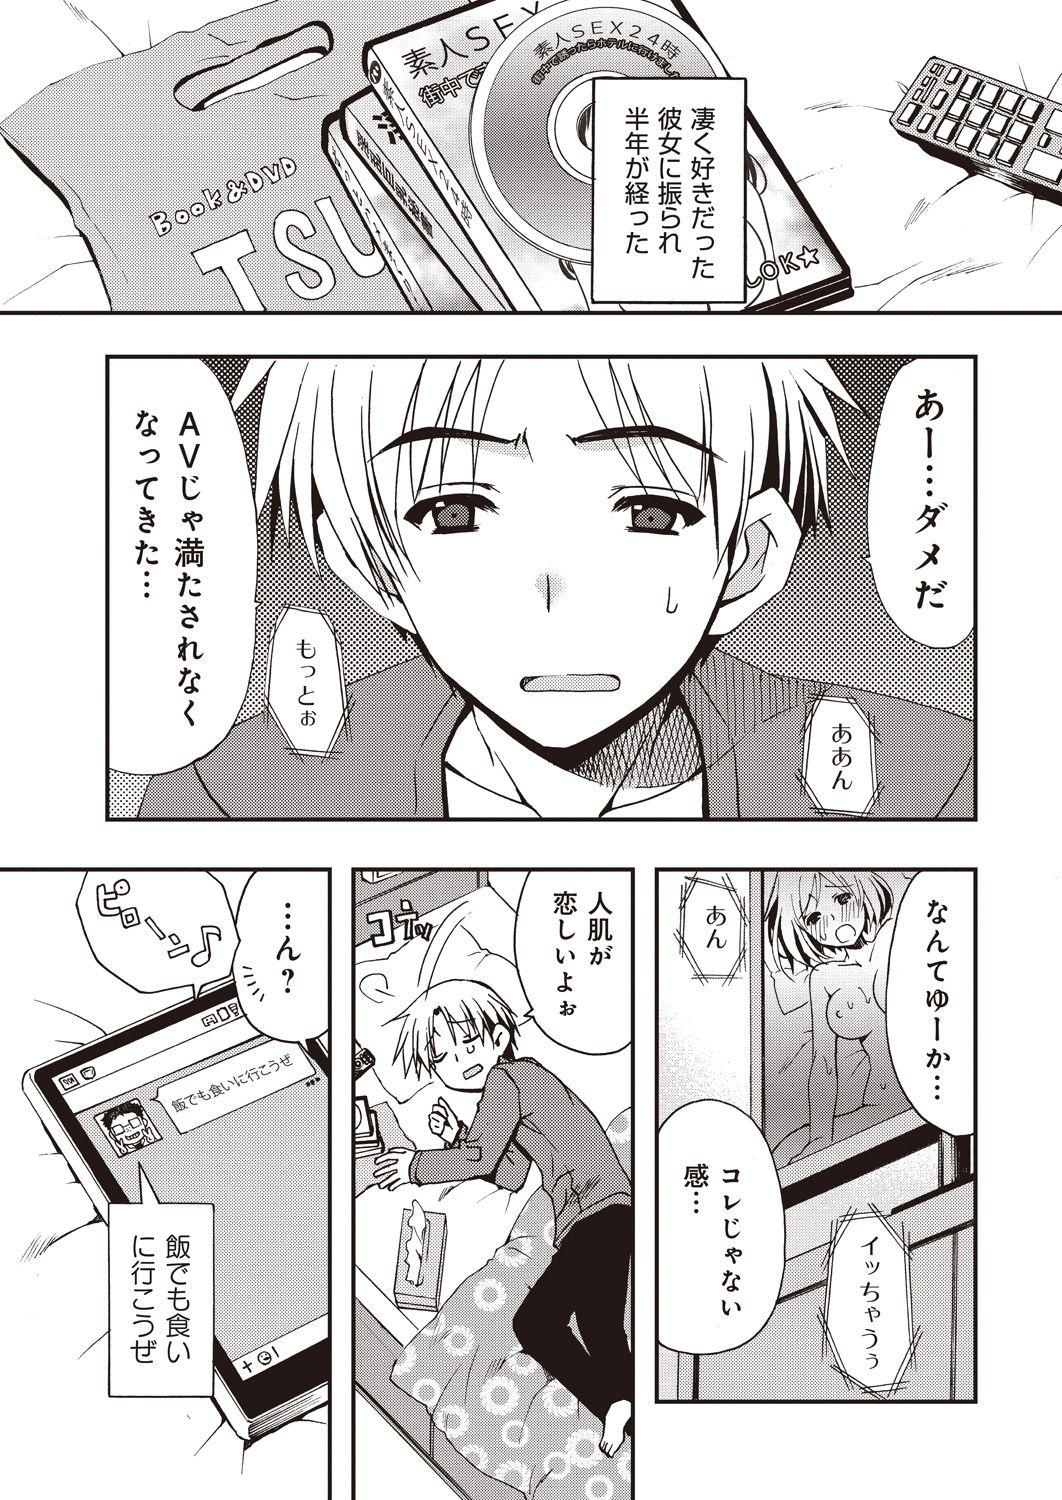 Atm 援交中！1-4 Russian - Page 5